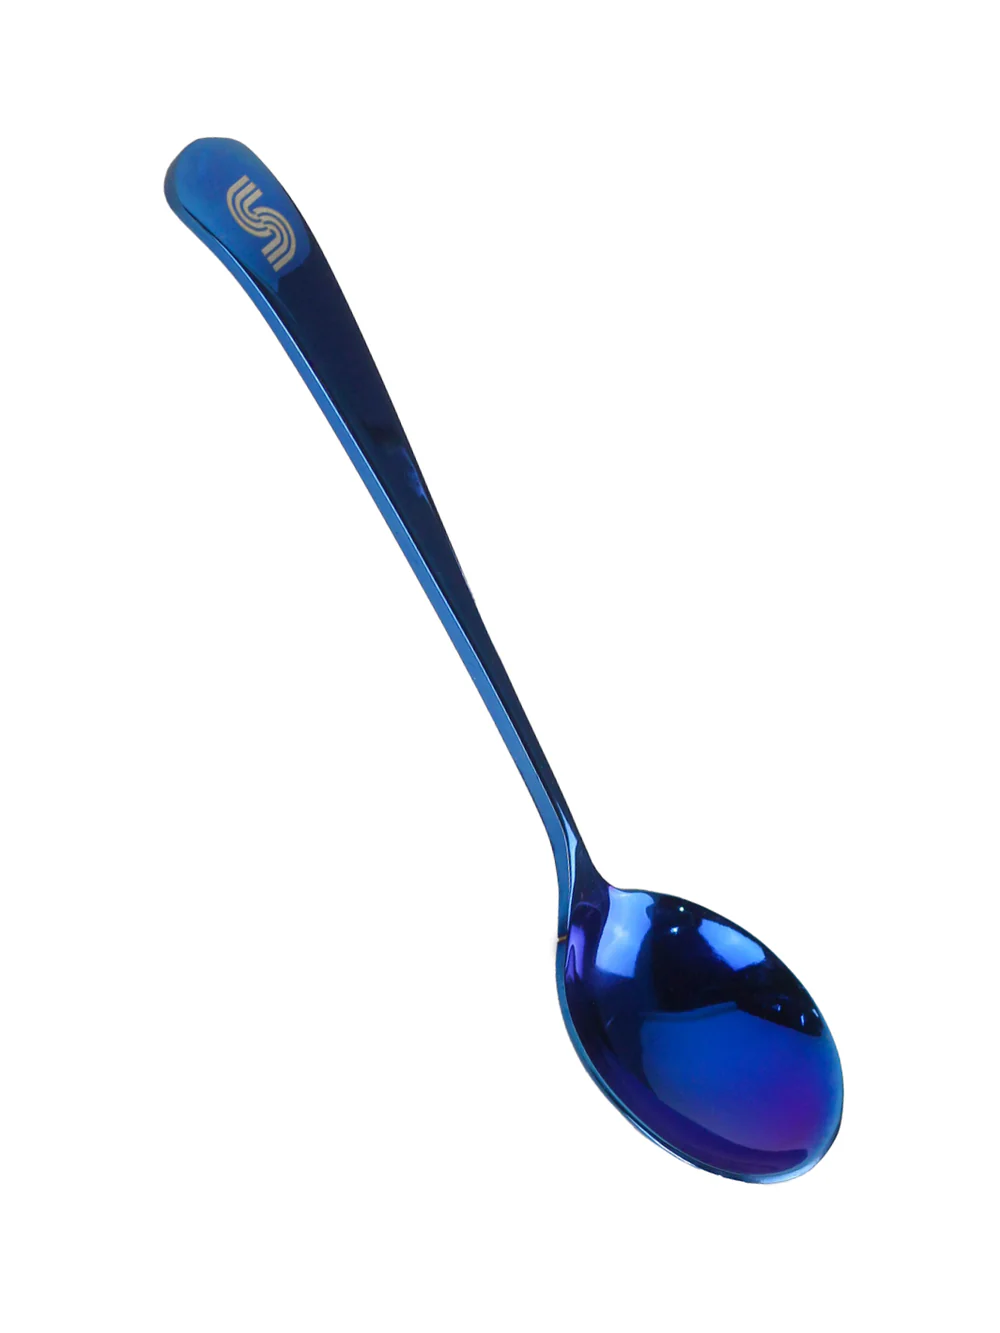 Supergood Cupping Spoon (Blue)